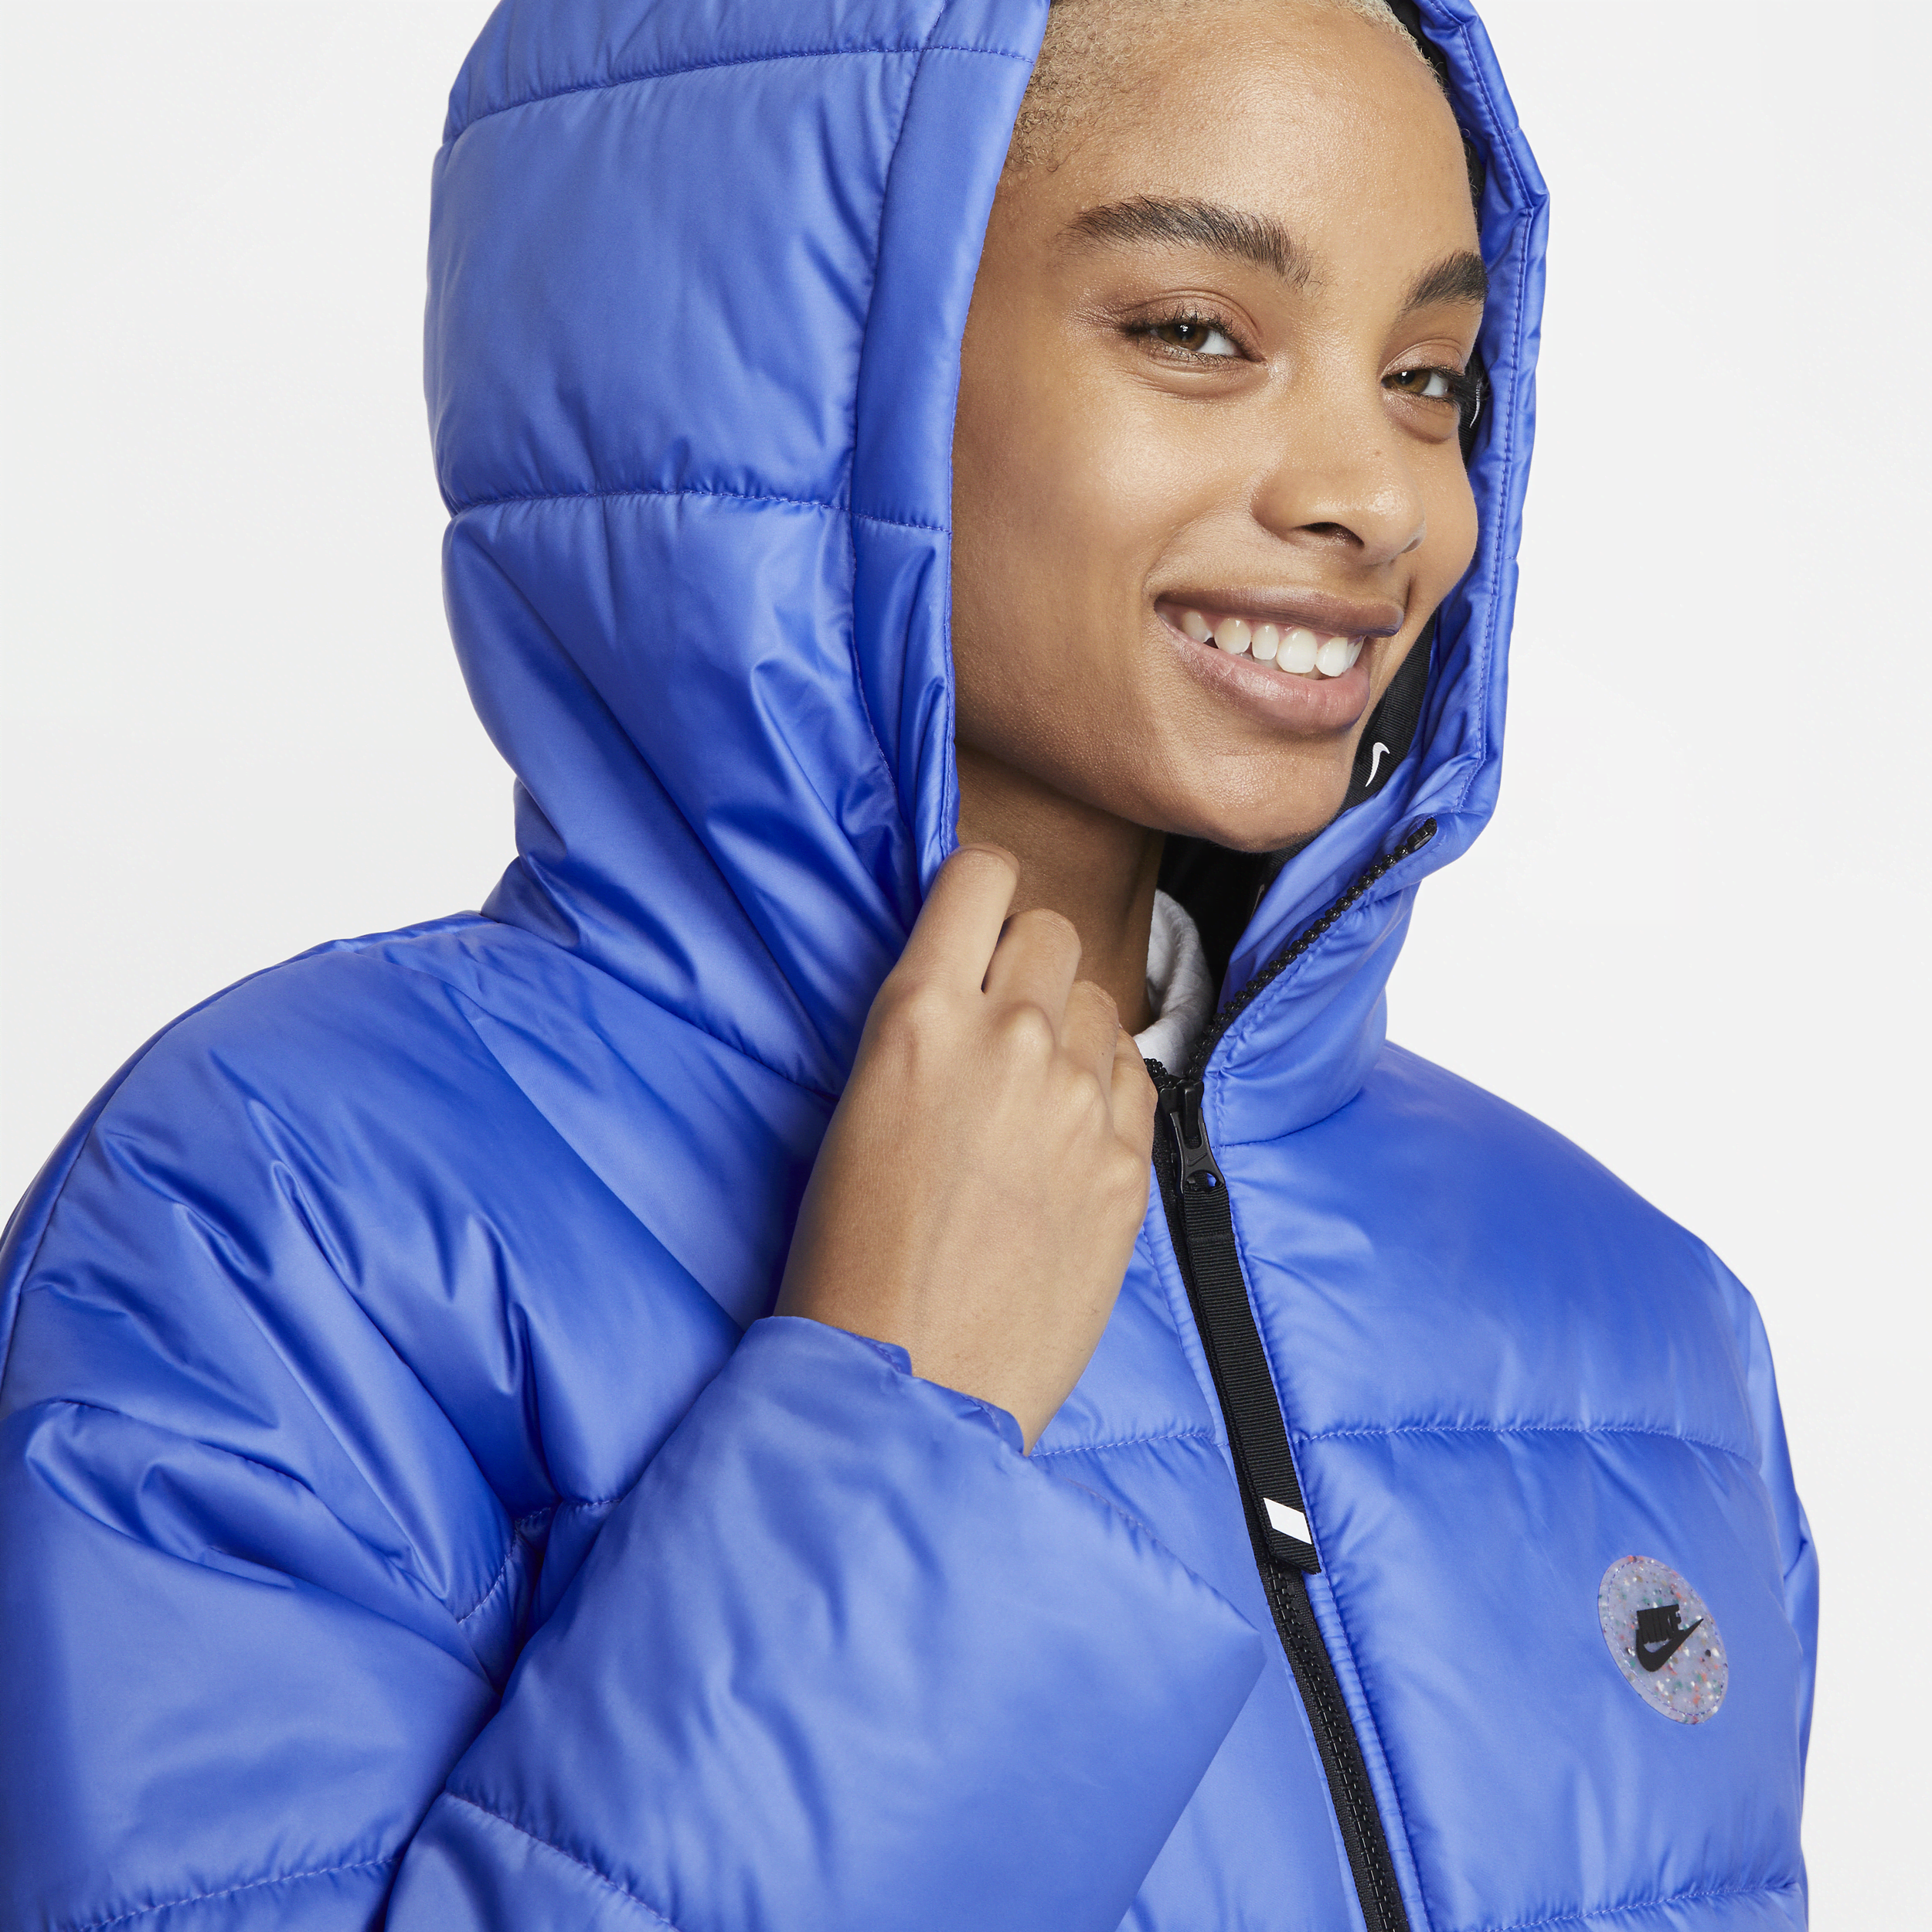 Nike classic padded jacket with hood in medium blue